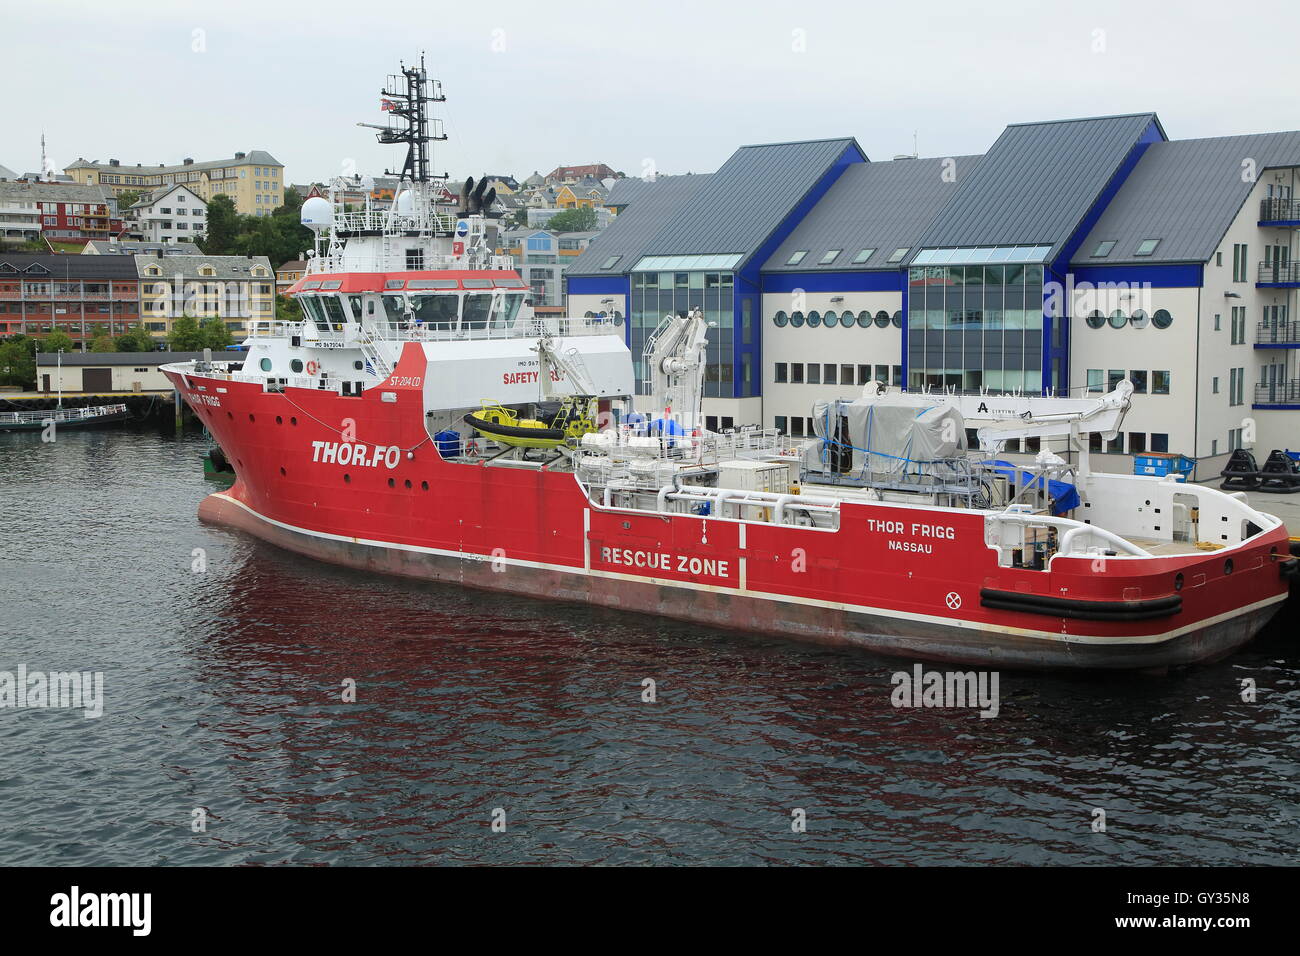 Thor Frigg research survey ship in harbour at Kristiansund, Romsdal county, Norway Stock Photo